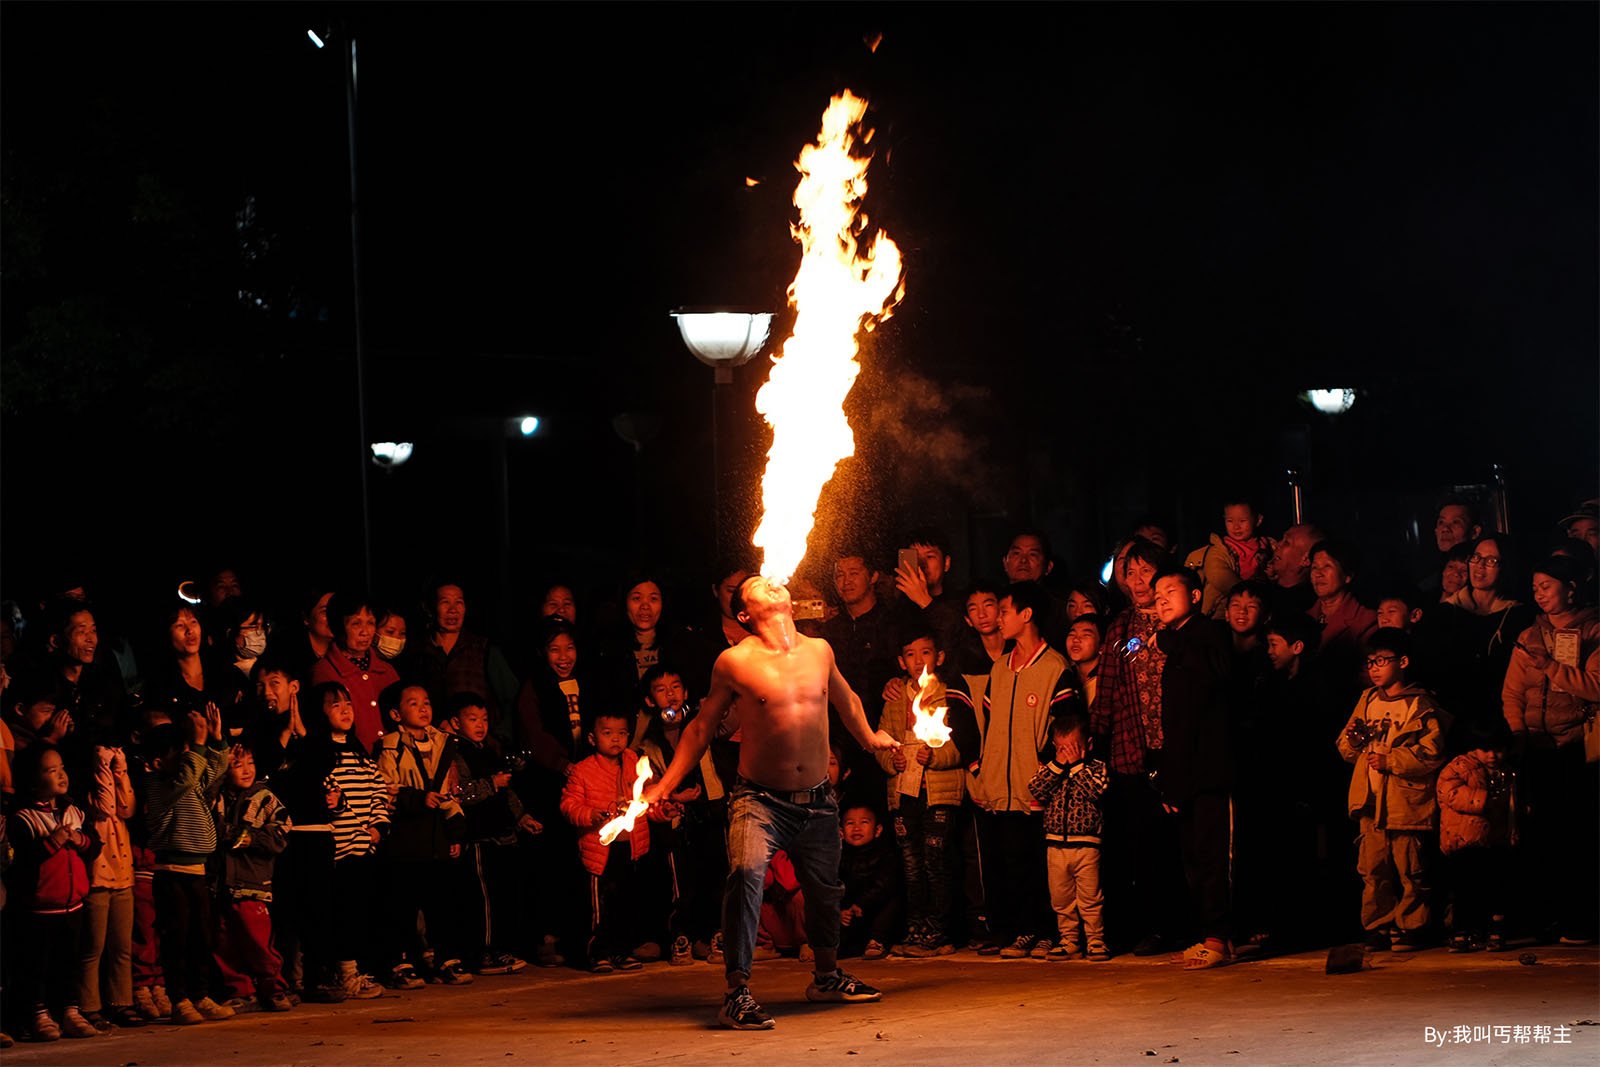 A shirtless fire performer breathes a large flame into the night sky, illuminated by a street lamp and surrounded by an amazed crowd.